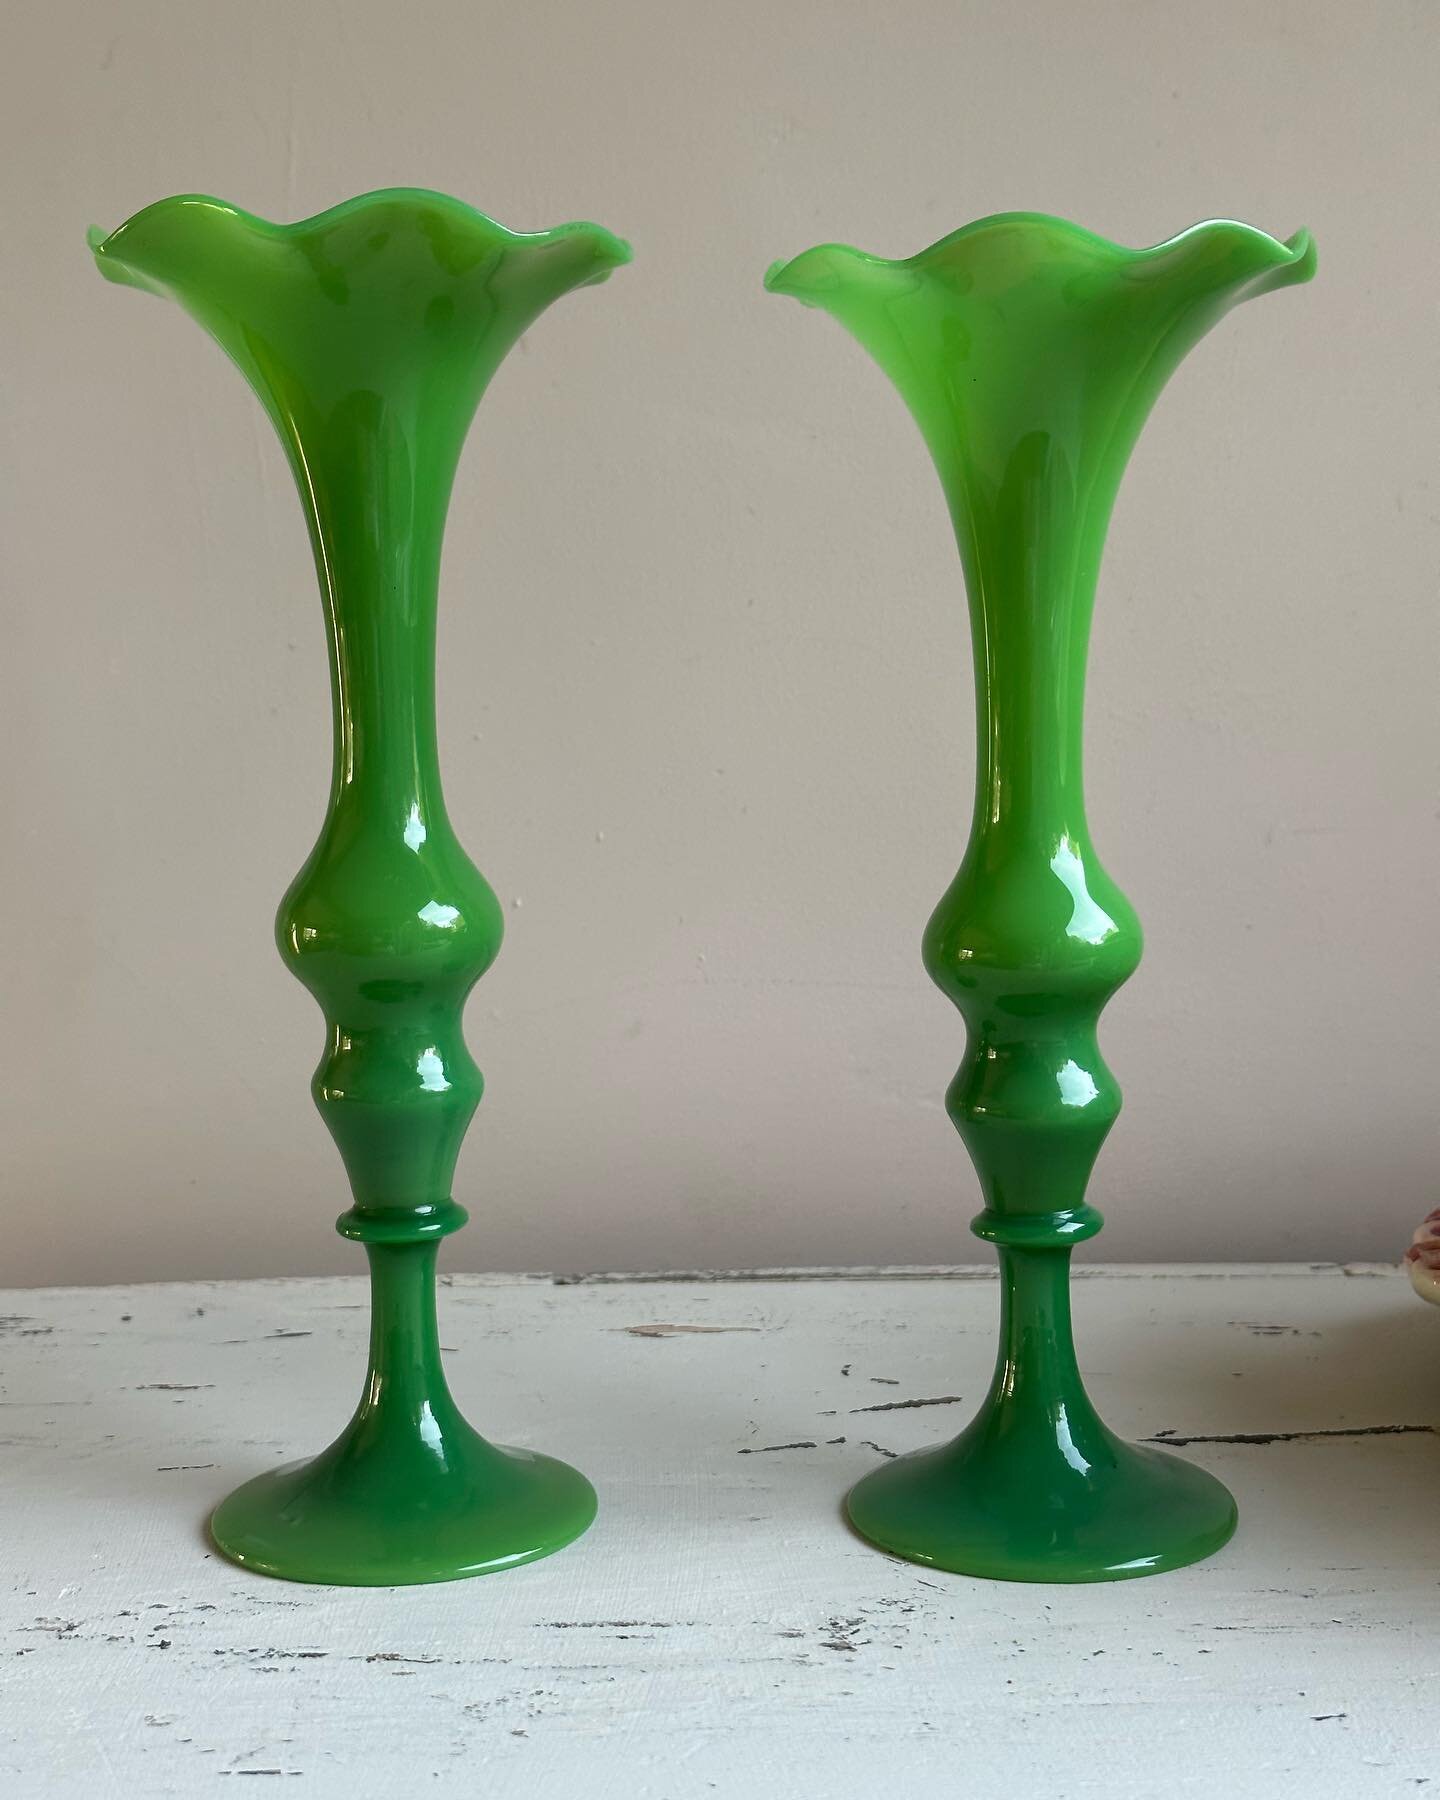 Stunning Opaline Frill Neck Vases in &lsquo;May Green&rsquo; ~ They are rather beautiful ~ SOLD 🐓💚